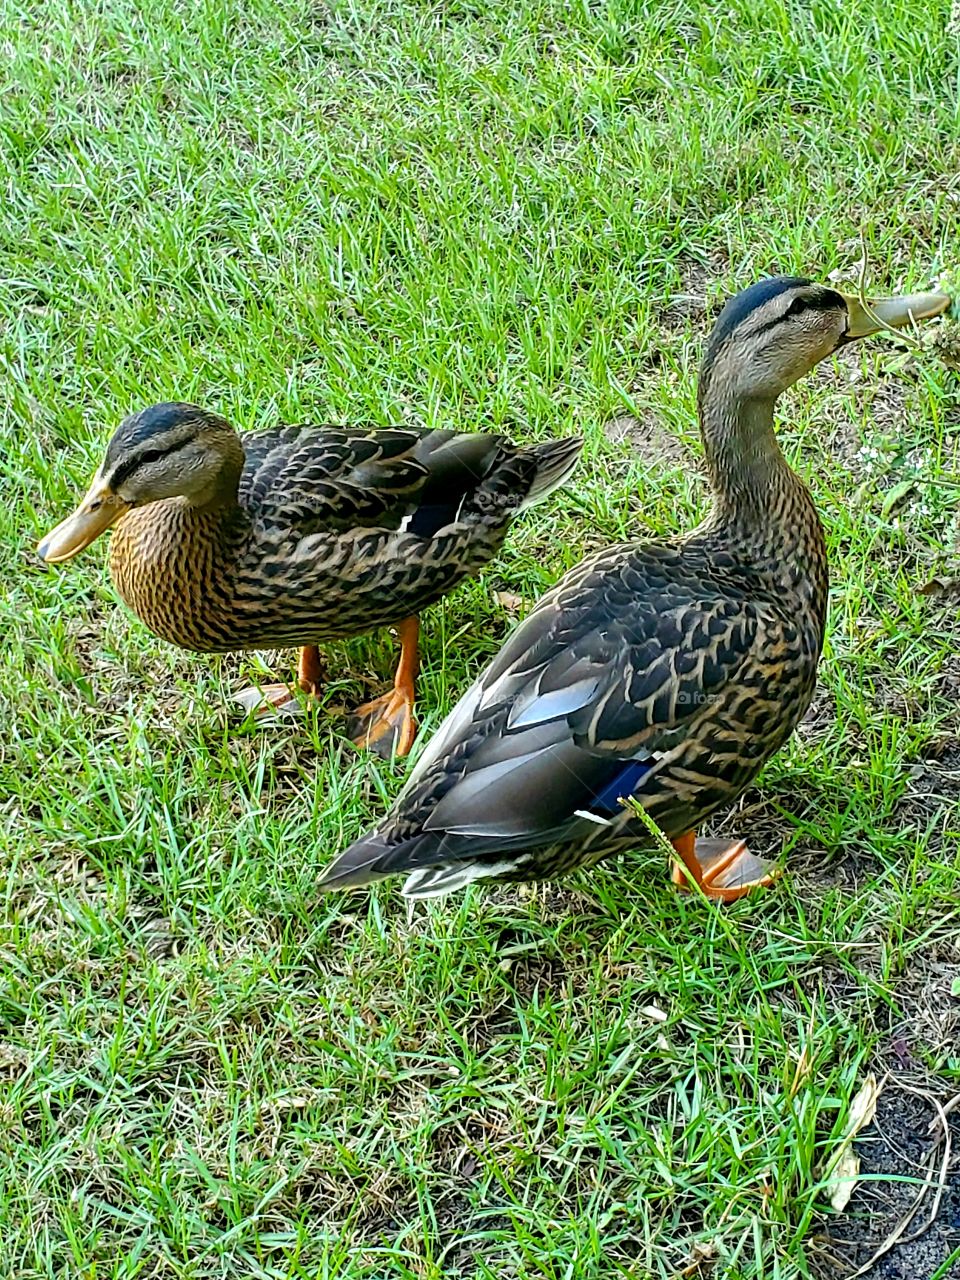 My duck visitors daily for a treat and my flowers to eat.